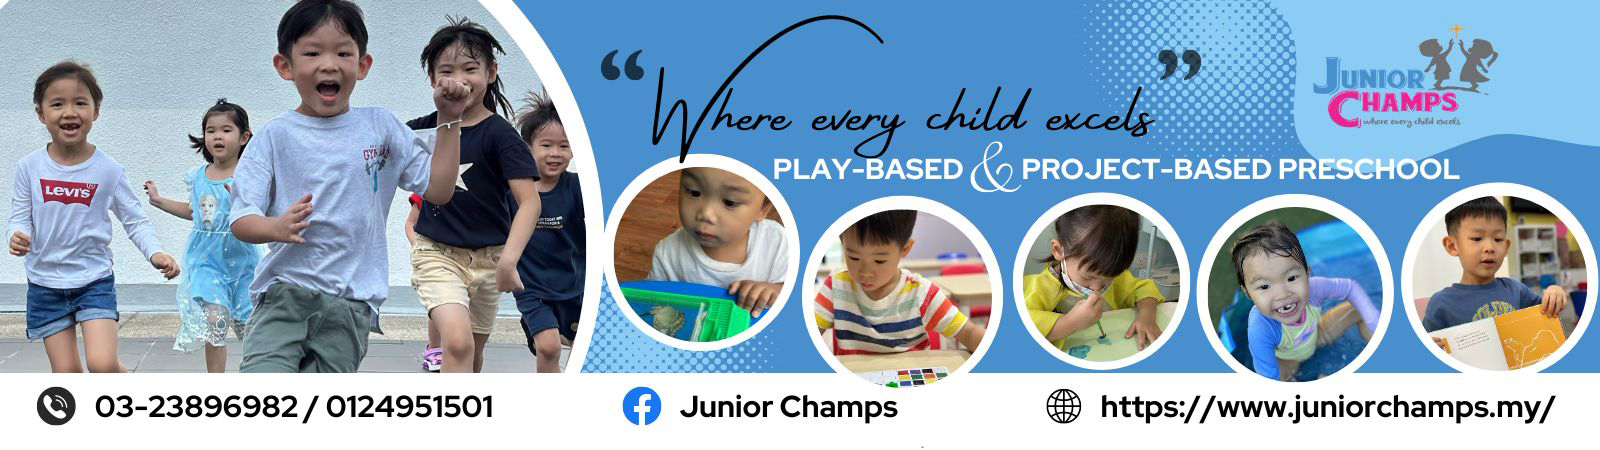 Junior Champs Preschool Mont Kiara: Nurturing Well-Rounded Learners through Innovative Education